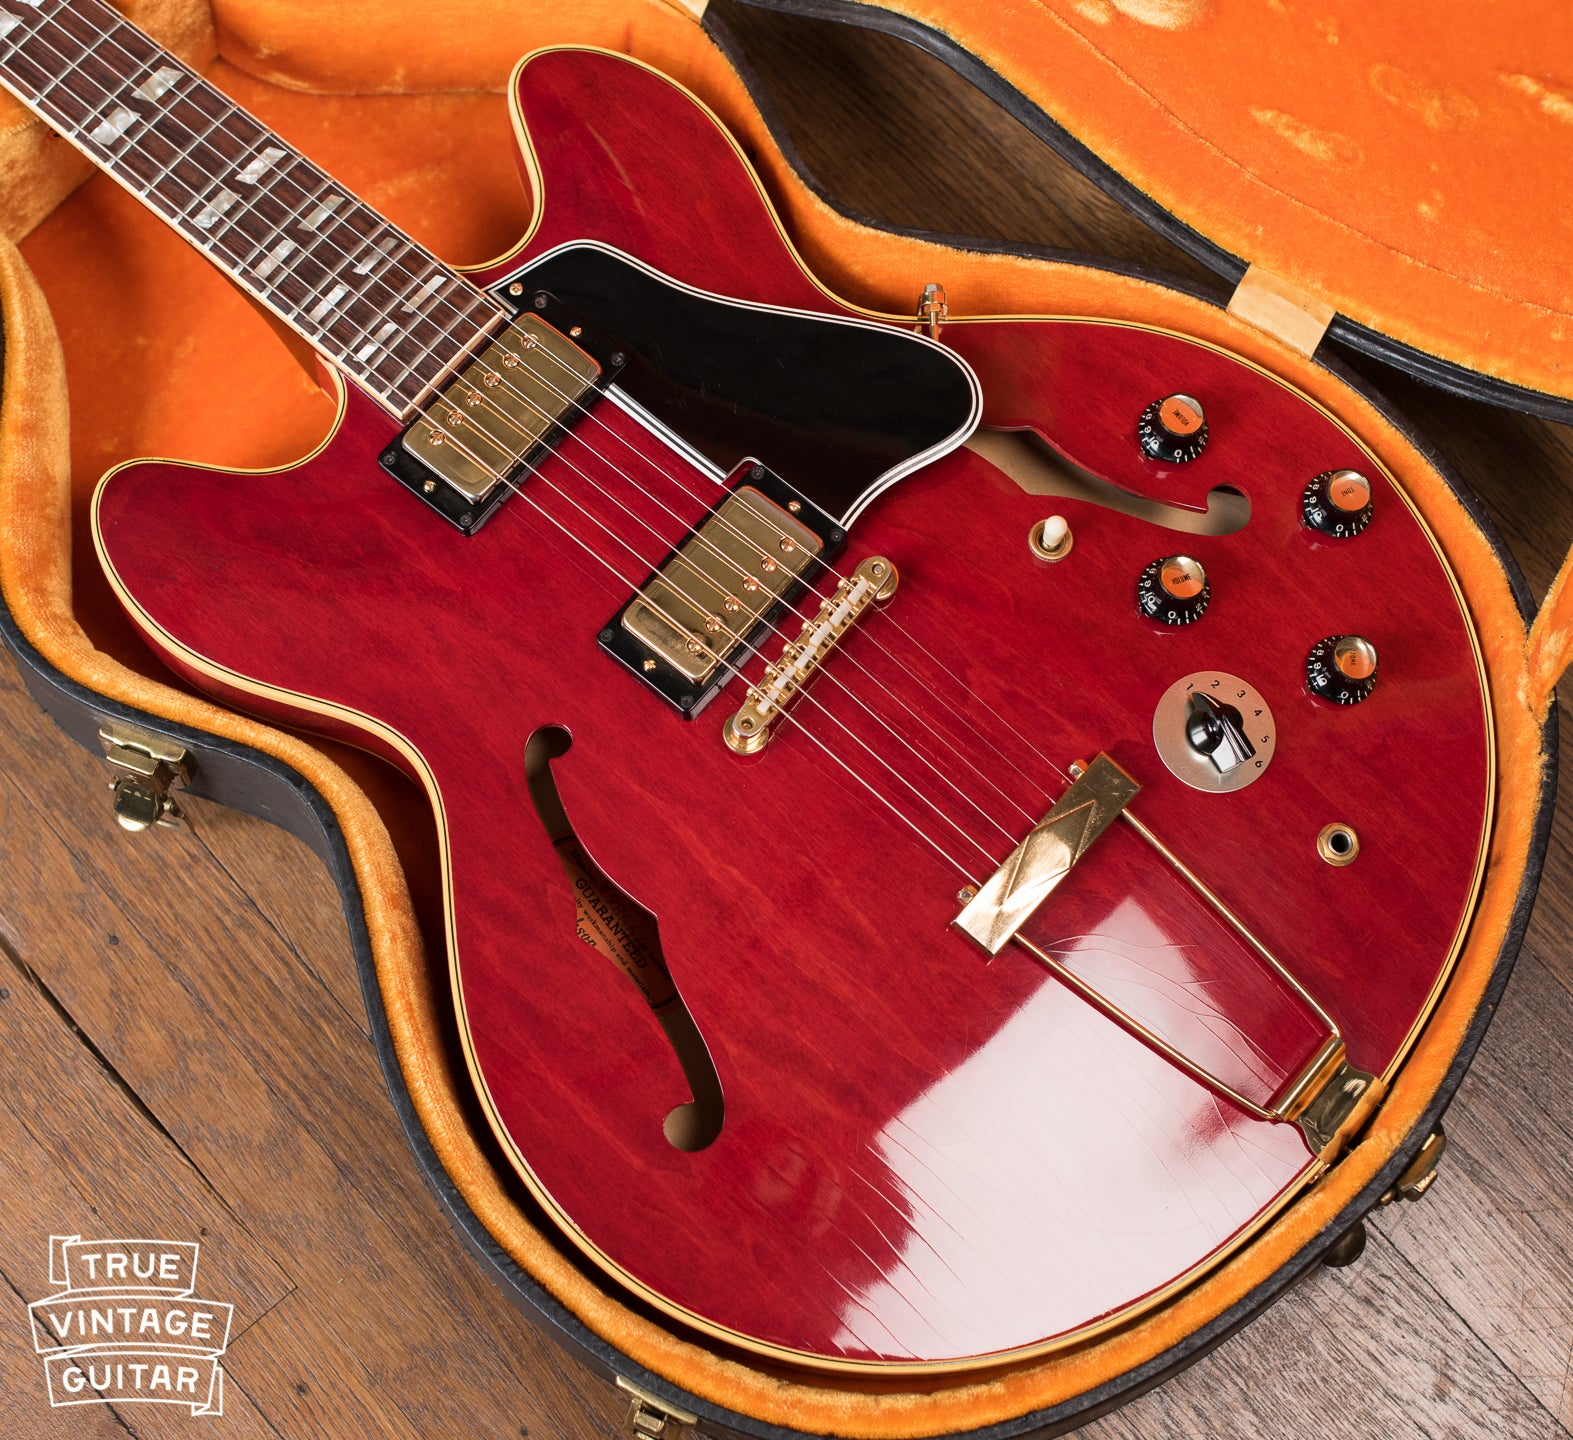 Gibson ES-345 1967 guitar Cherry Red with gold parts with Stereo output and Varitone switch